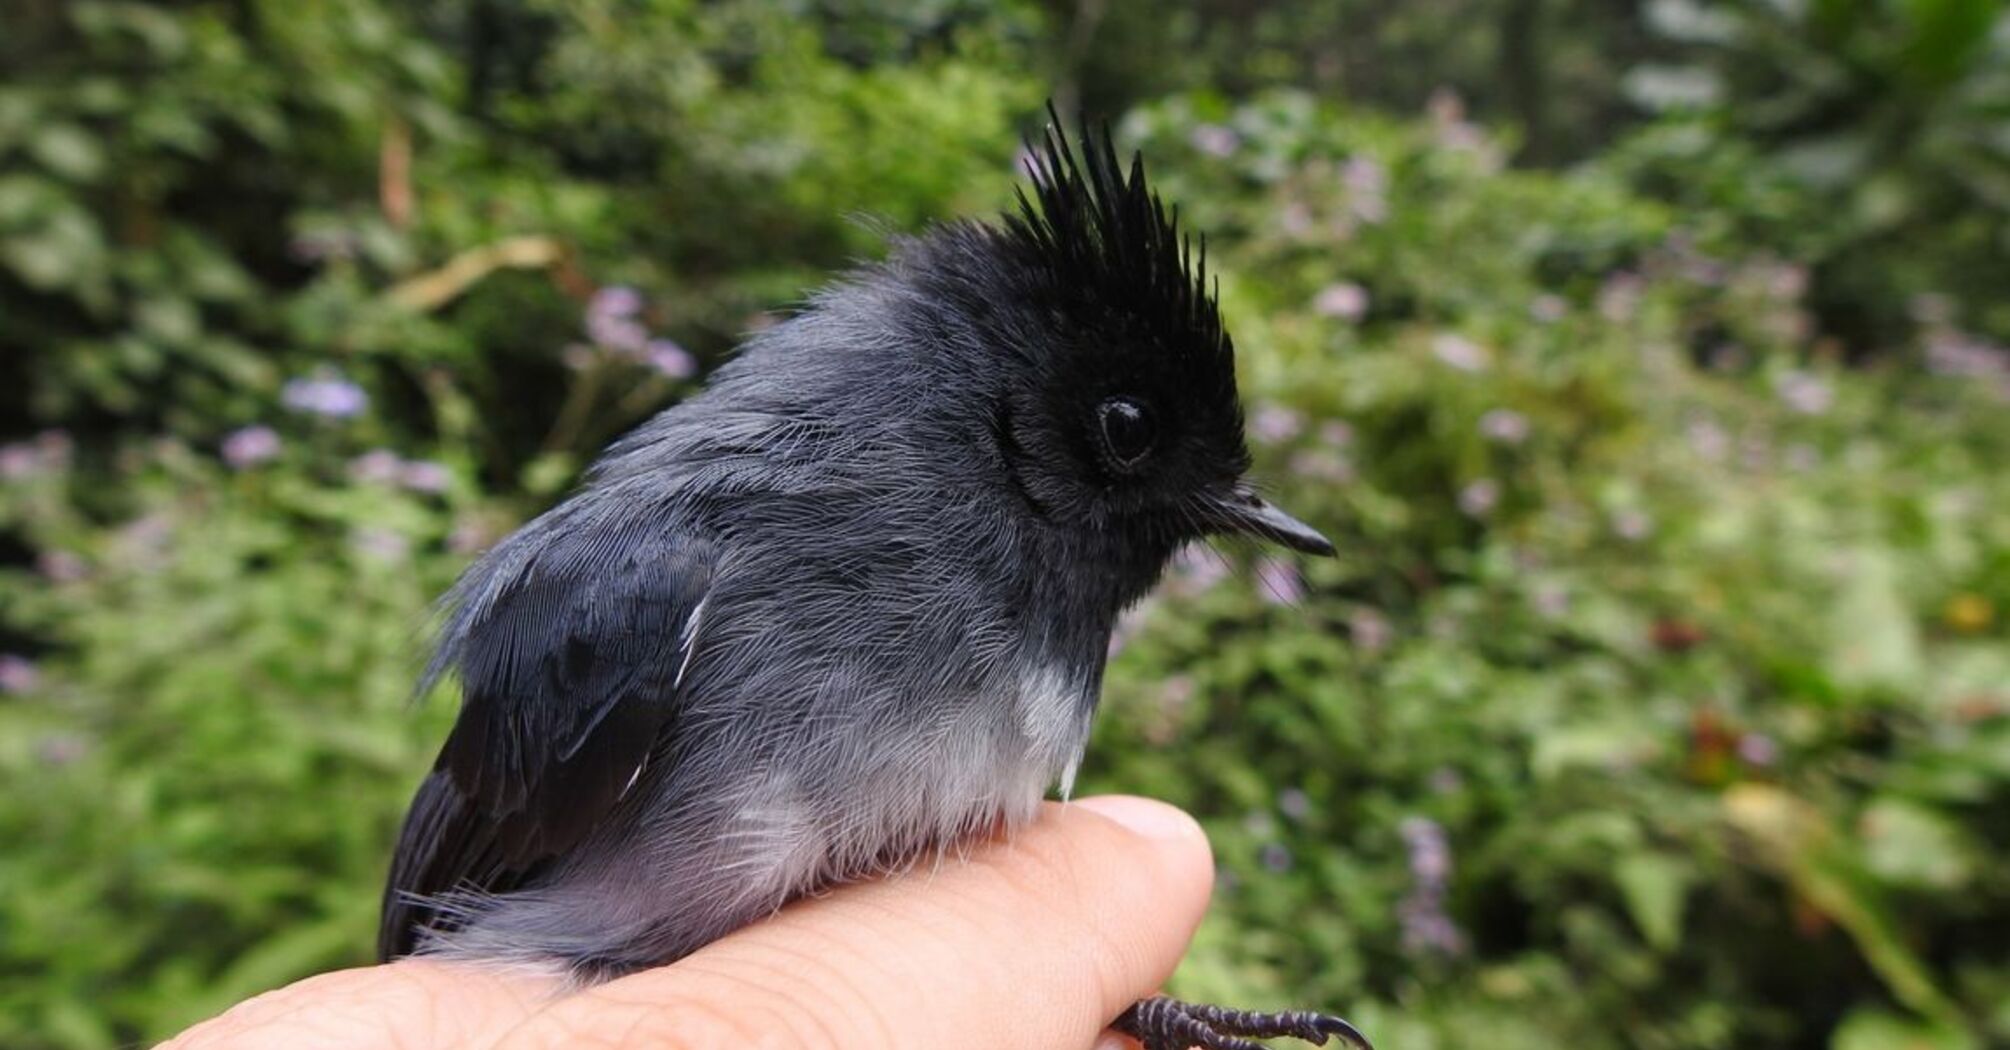 With climate warming, birds are becoming larger: researchers are studying size changes in birds in mountainous regions